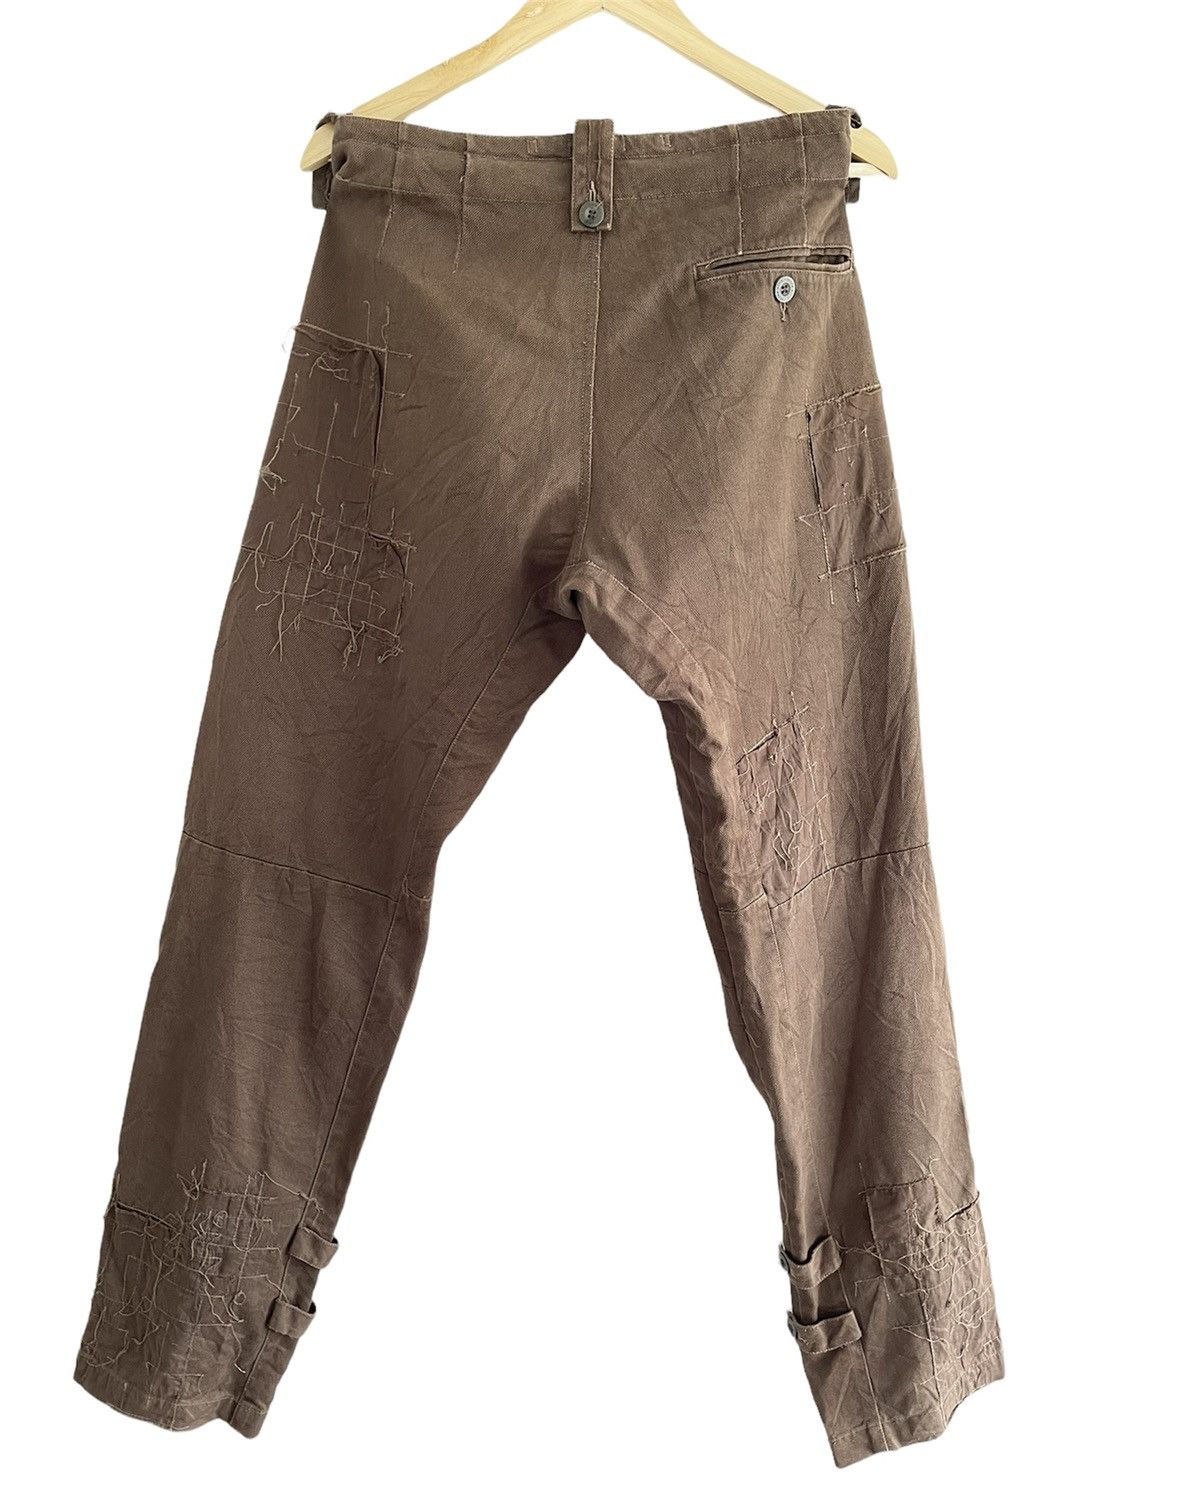 Japanese Brand - IN THE ATTIC CARGO PATCH PANT INSPIRED BY KAPITAL - 2